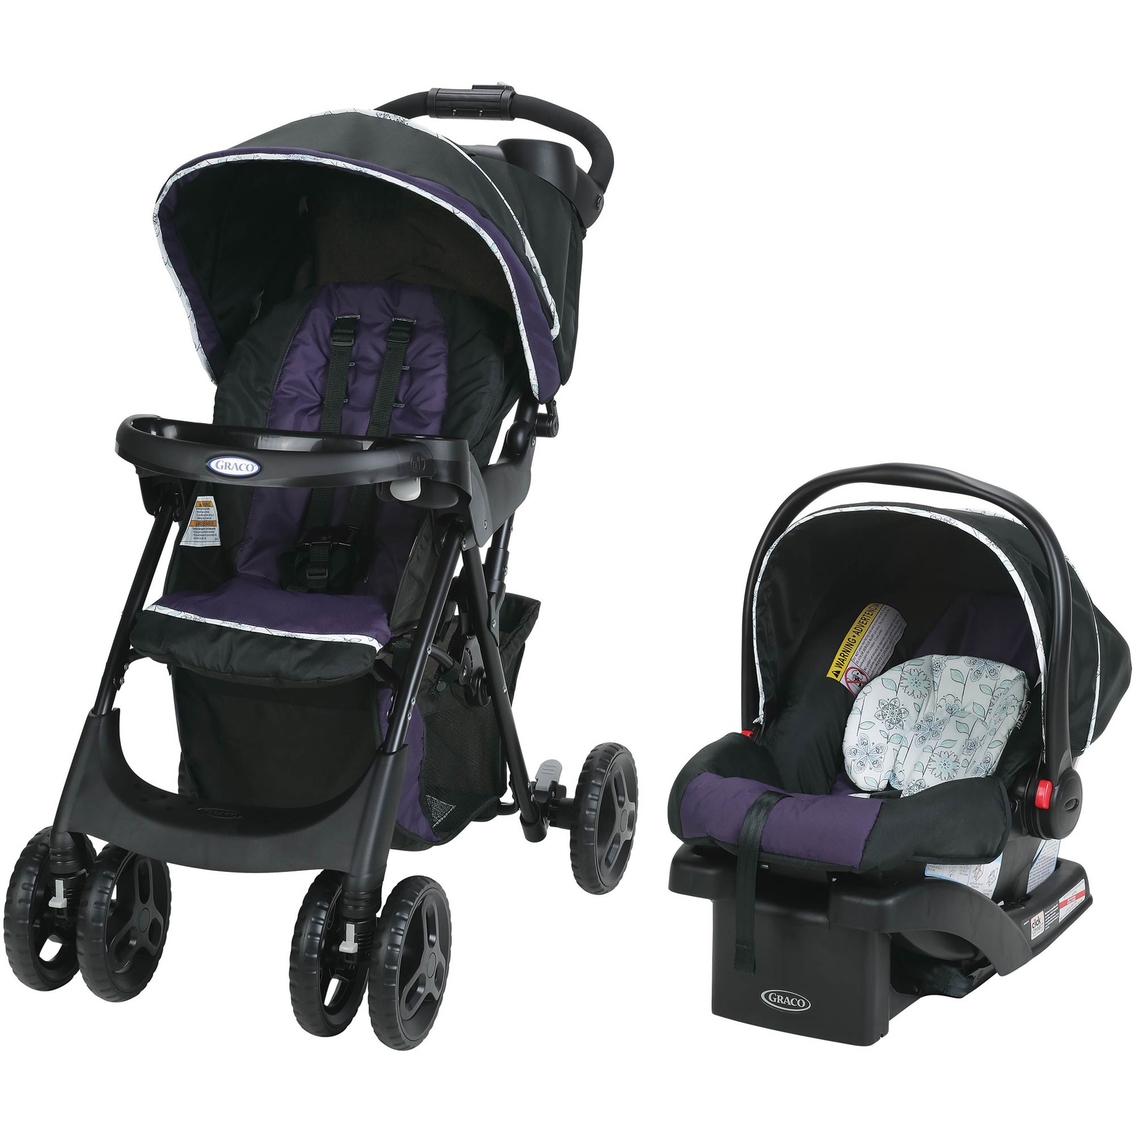 graco infant seat and stroller